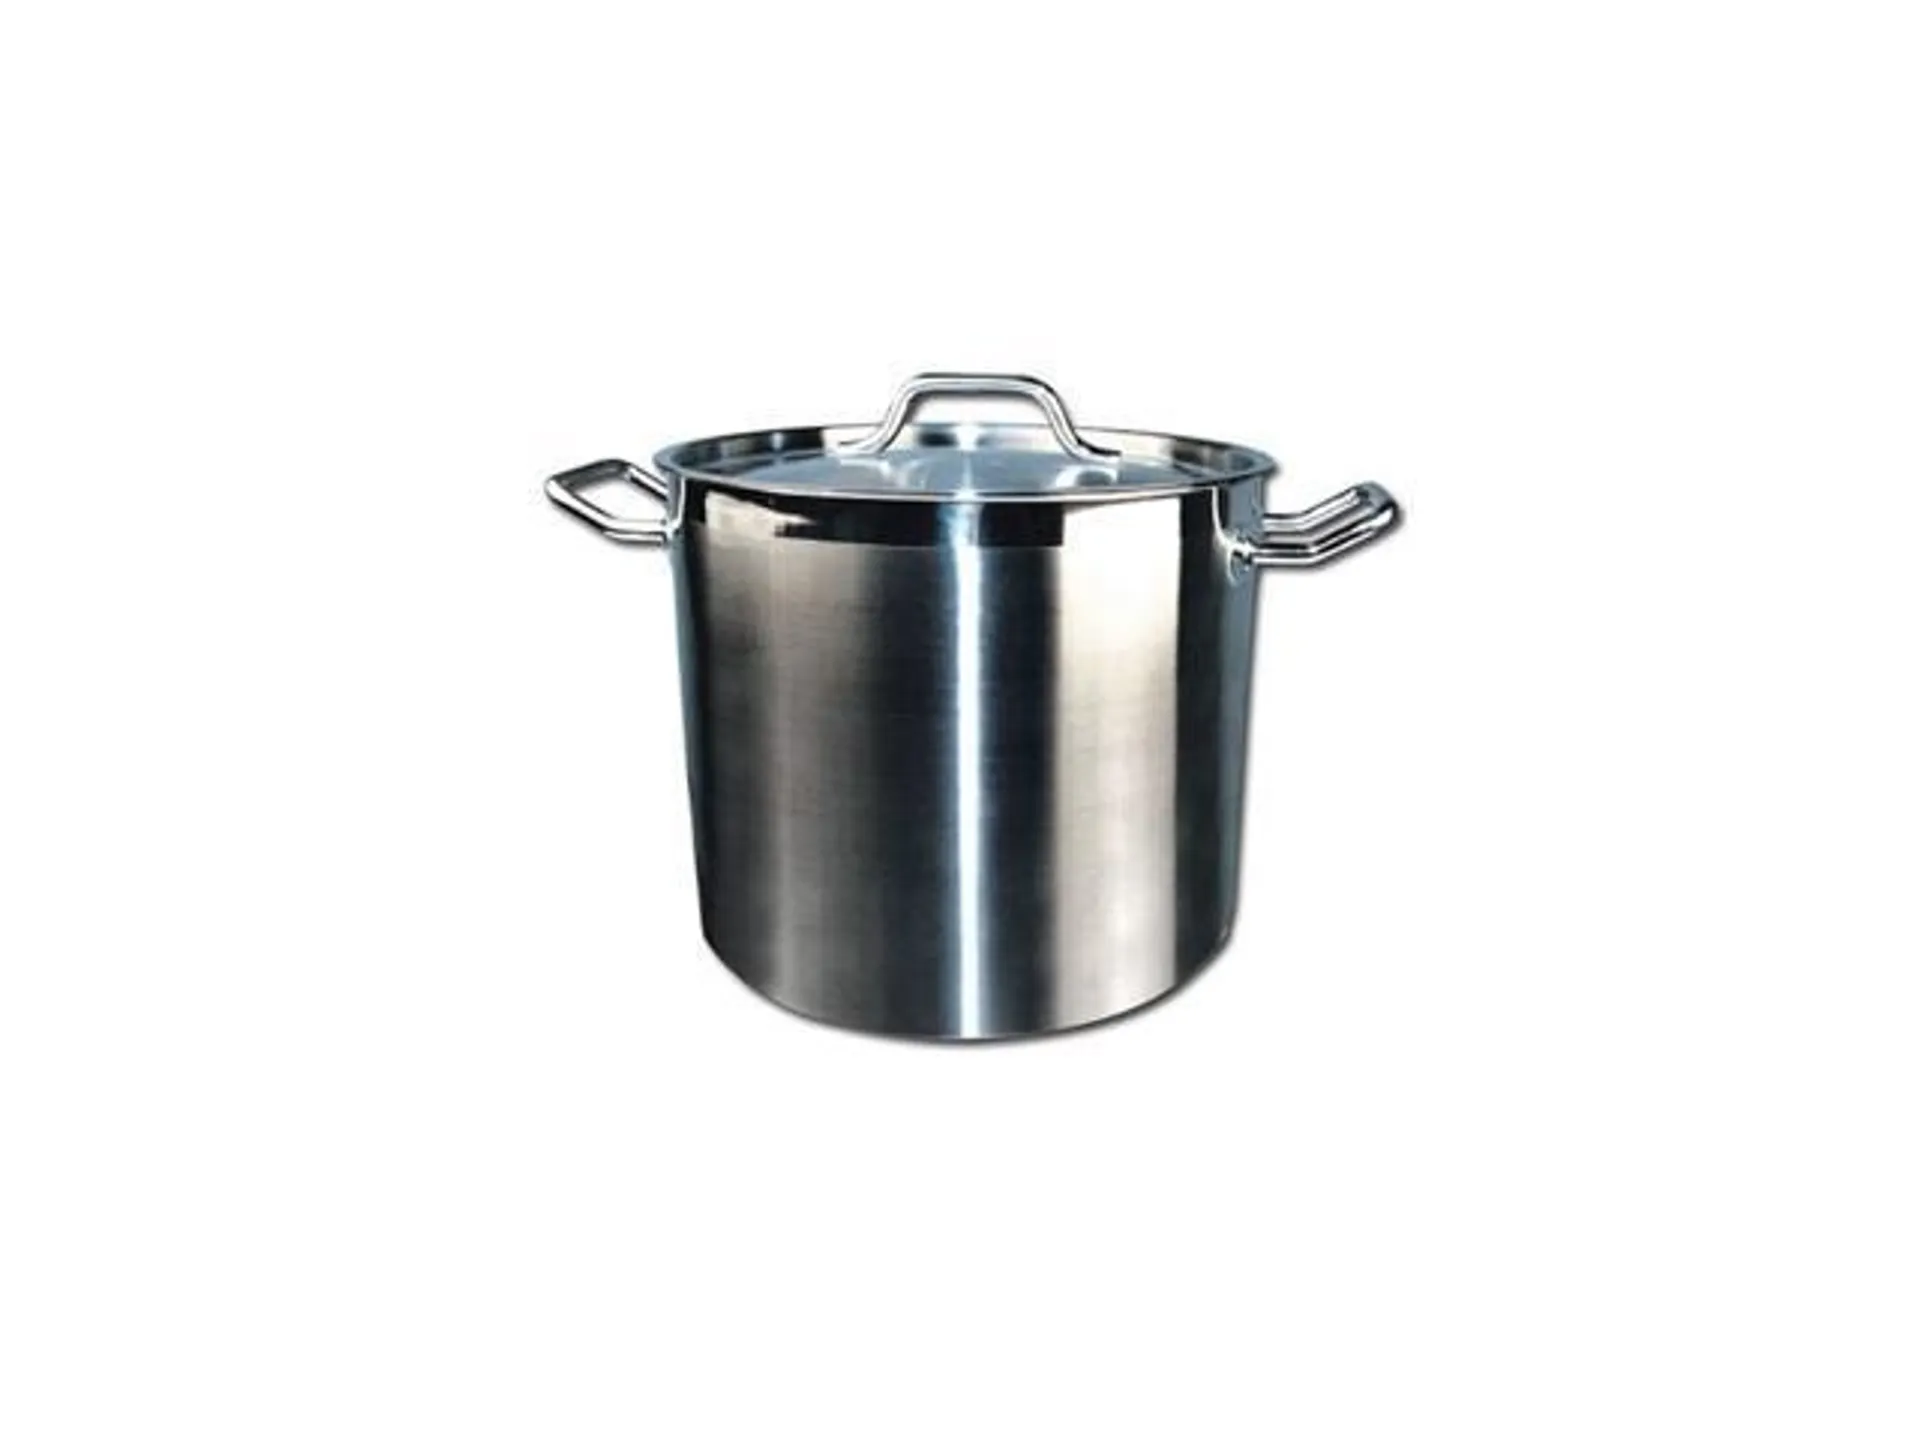 Stainless Steel 80 Quart Stock Pot with Cover